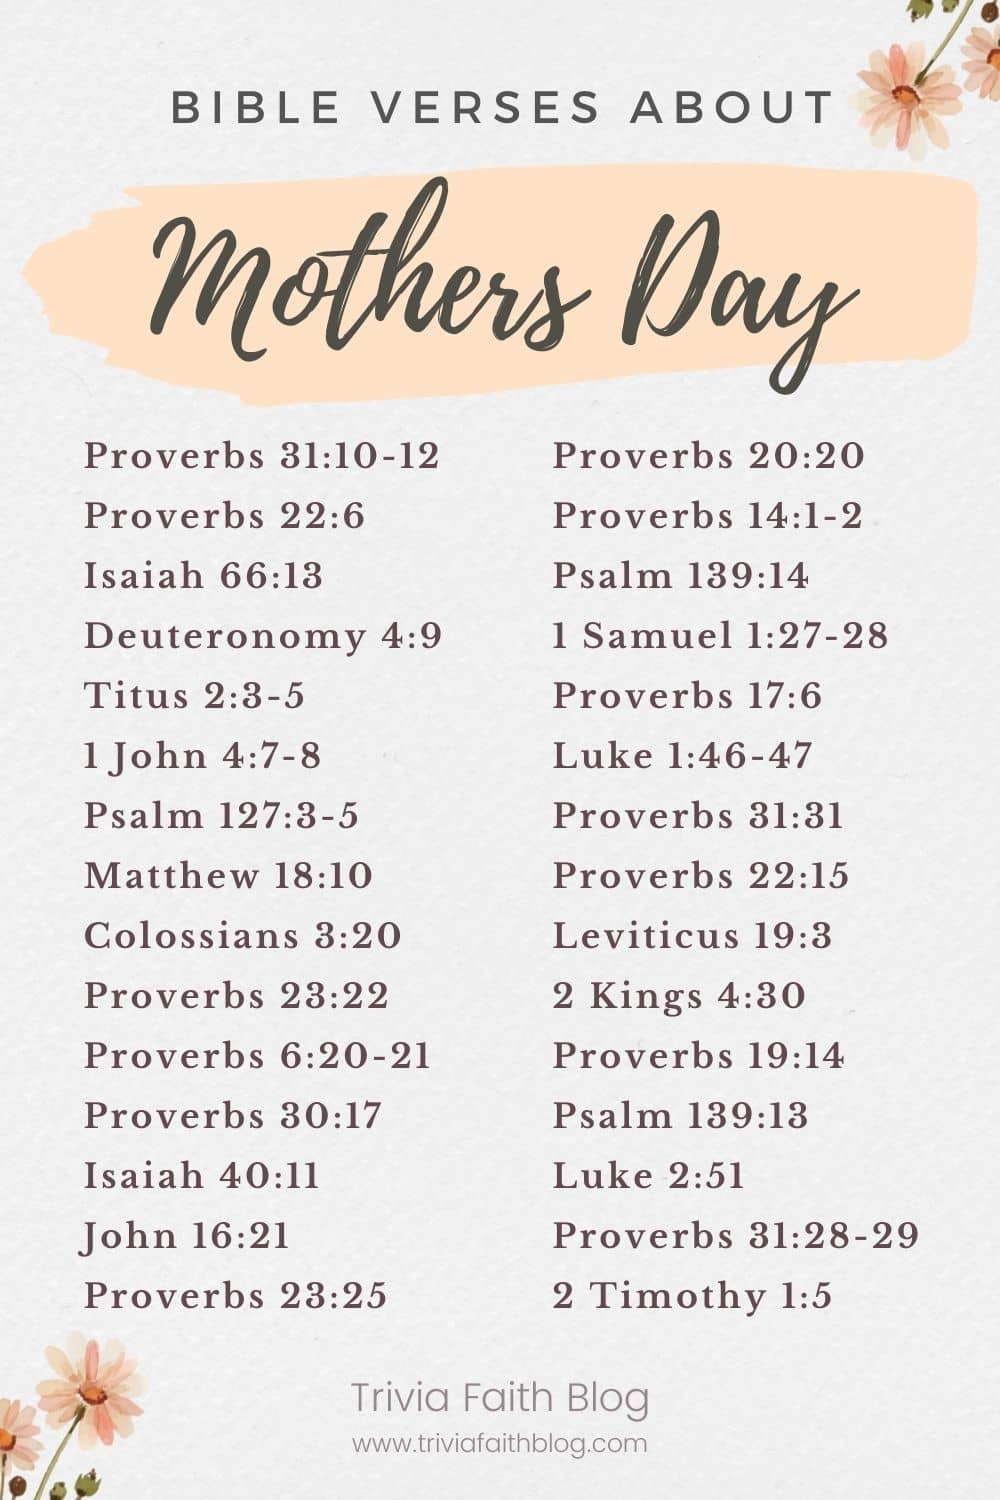 Bible verses about mothers day